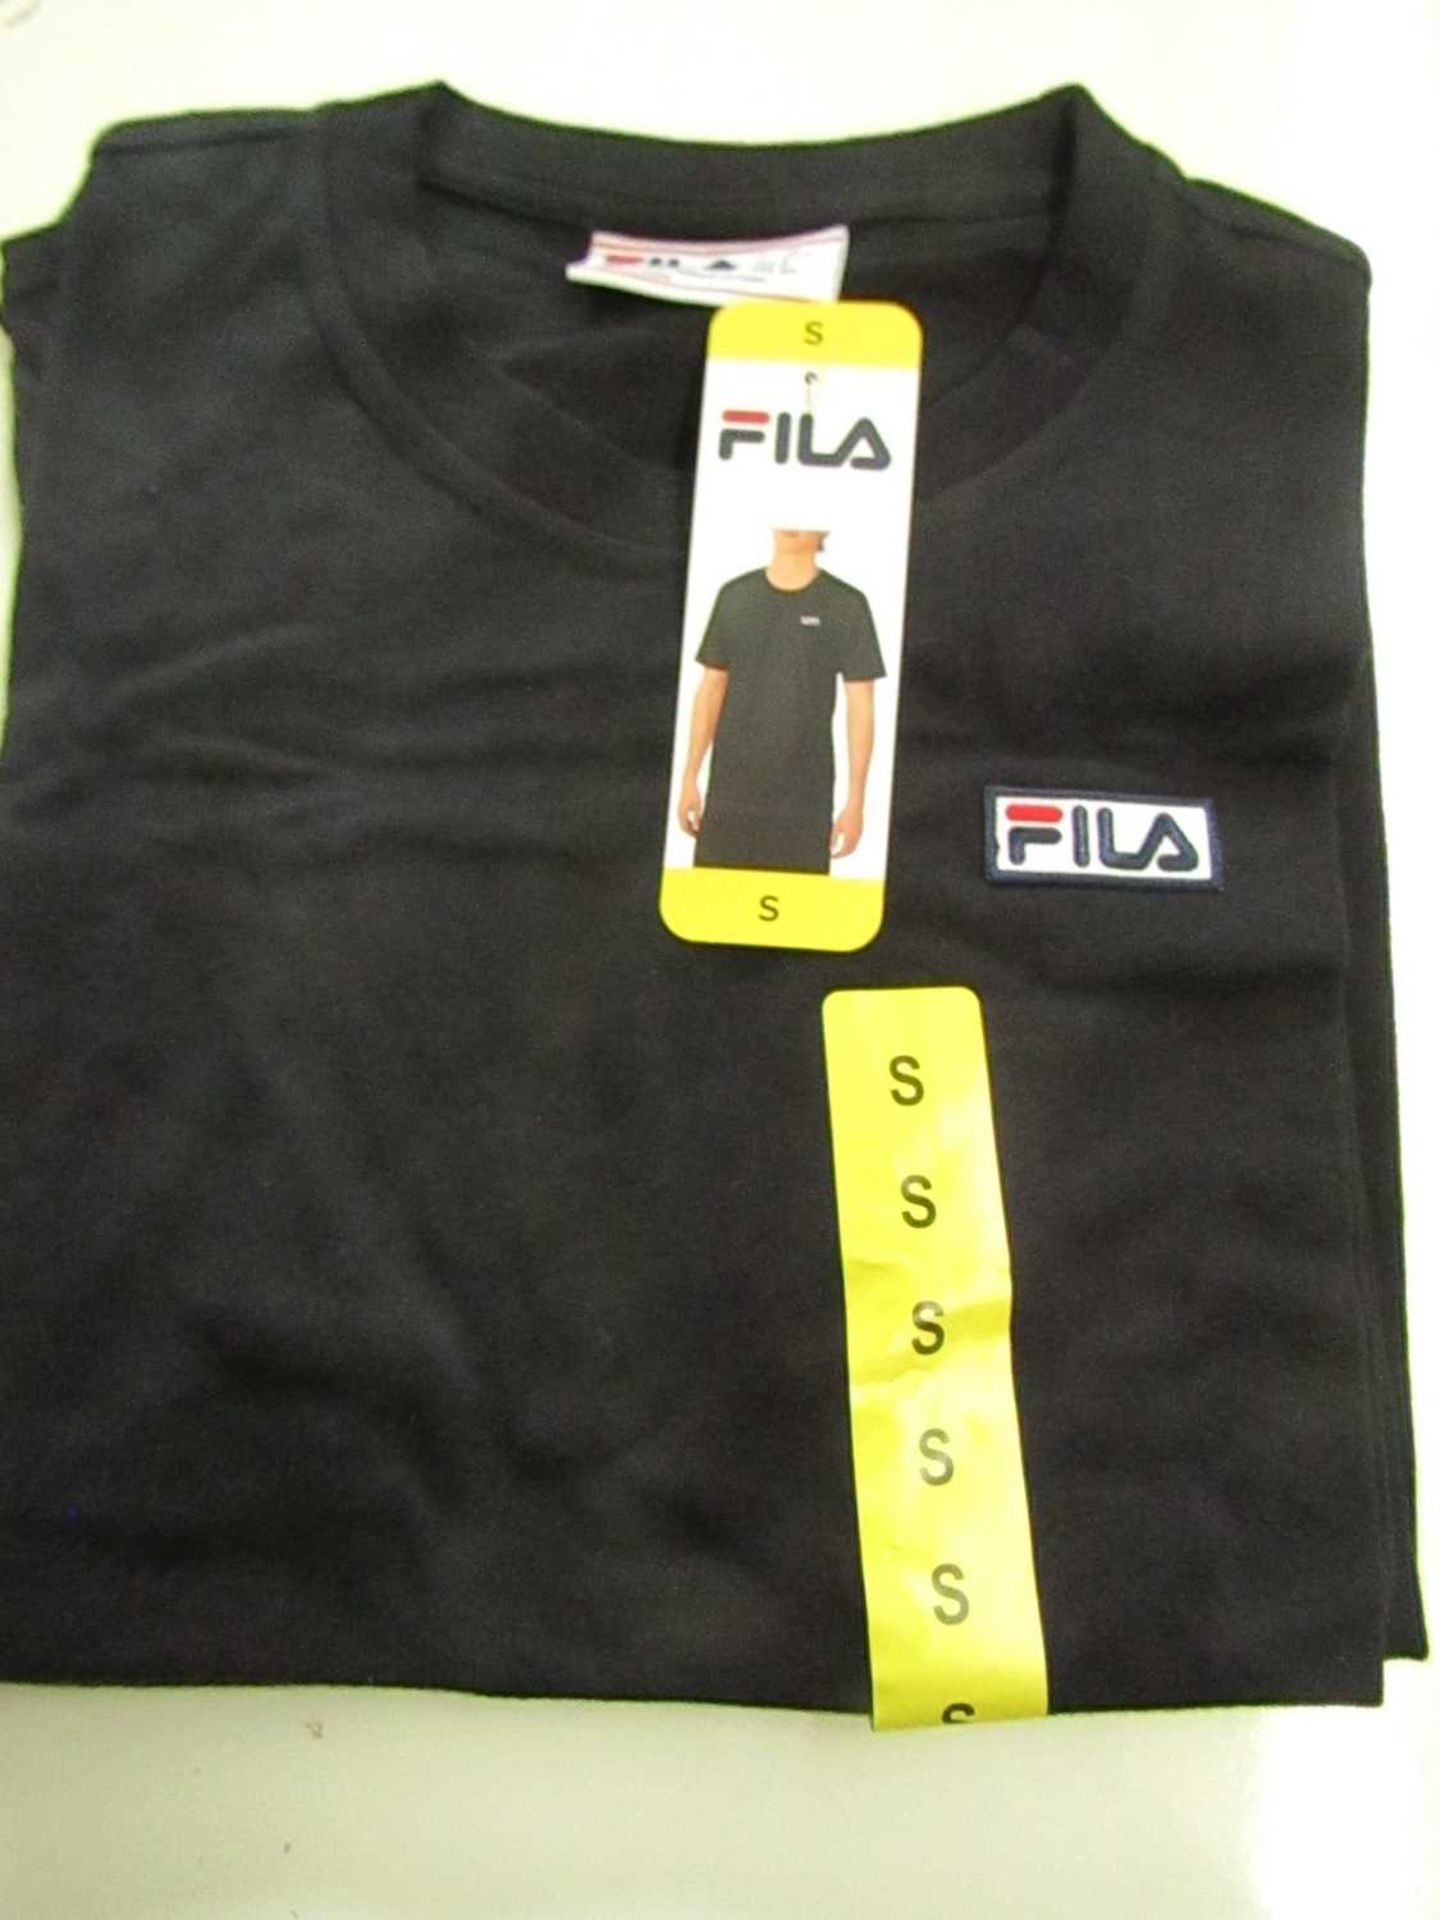 Fila Lucano T/Shirt Black Size S New With Tags